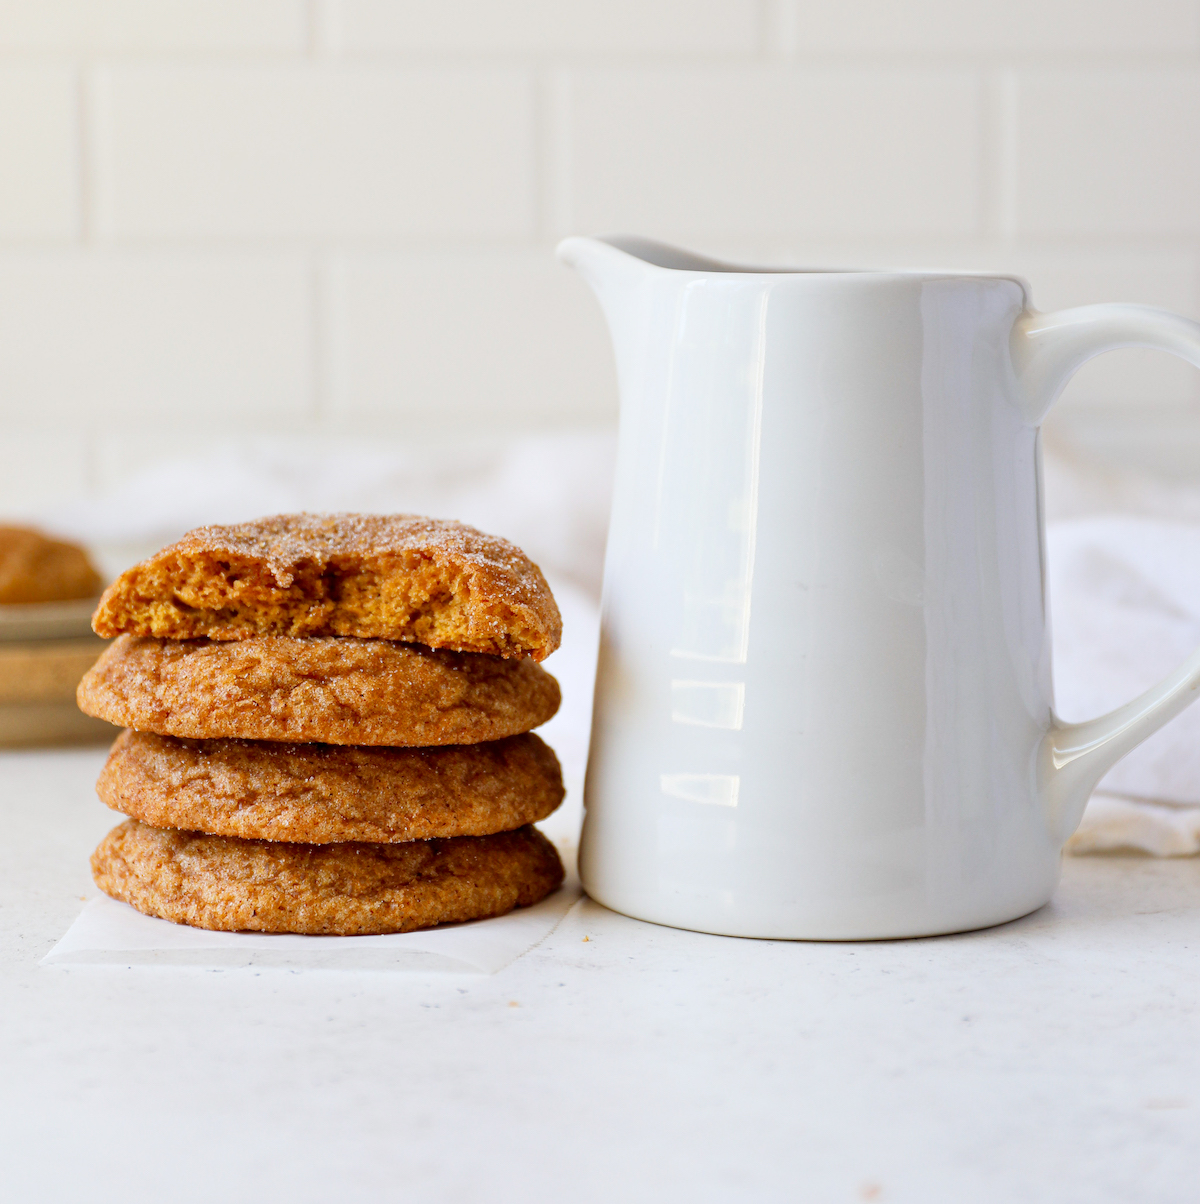 Four stacked pumpkin snickerdoodle cookies next to a milk pitcher on a white surface.